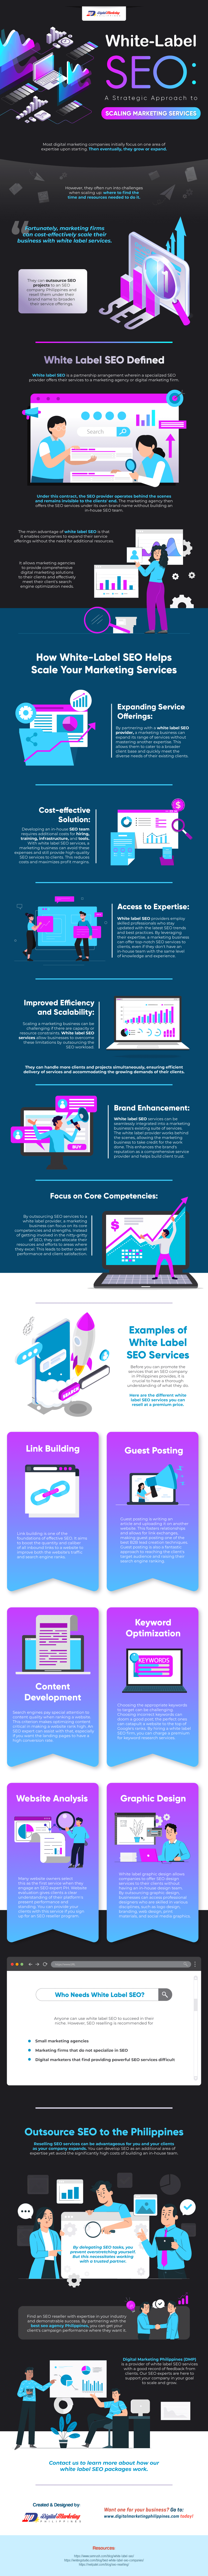 White-Label SEO: A Strategic Approach to Scaling Marketing Services Infographic